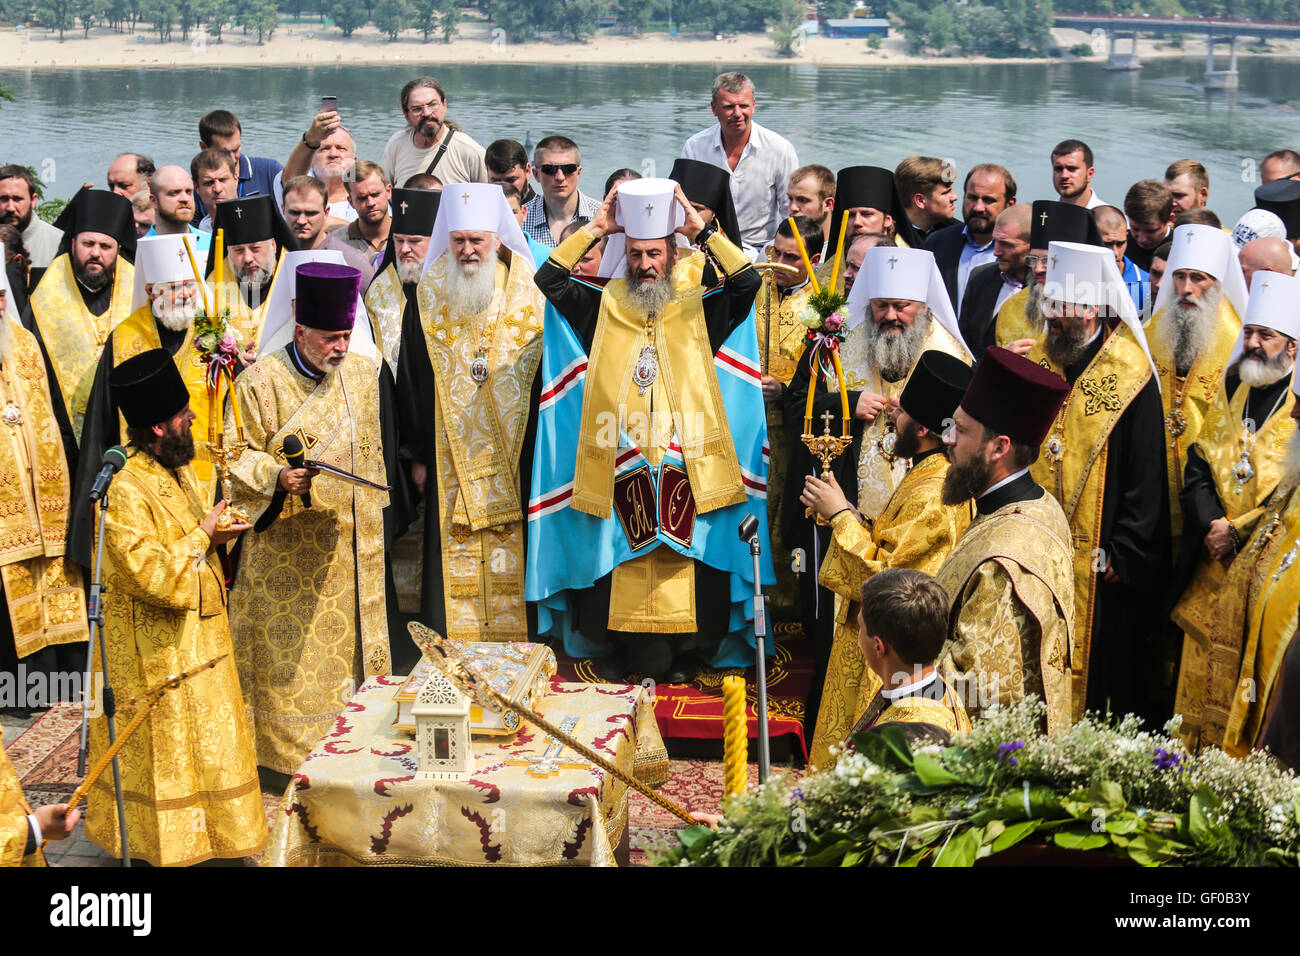 Kyiv, Ukraine. 27th July, 2016. The Primate of the Moscow Patriarchate Ukrainian Orthodox Church, Metropolitan of Kyiv and All Ukraine Onufry blesses believers during a ceremonial prayer service. Ukrainian orthodox believers, priests, monks attend a religion march organized by the Ukrainian Orthodox Church of the Moscow Patriarchate. The main celebrations took place at Vladimir's Hill in the center of Kyiv. Credit:  Oleksandr Khomenko/Pacific Press/Alamy Live News Stock Photo